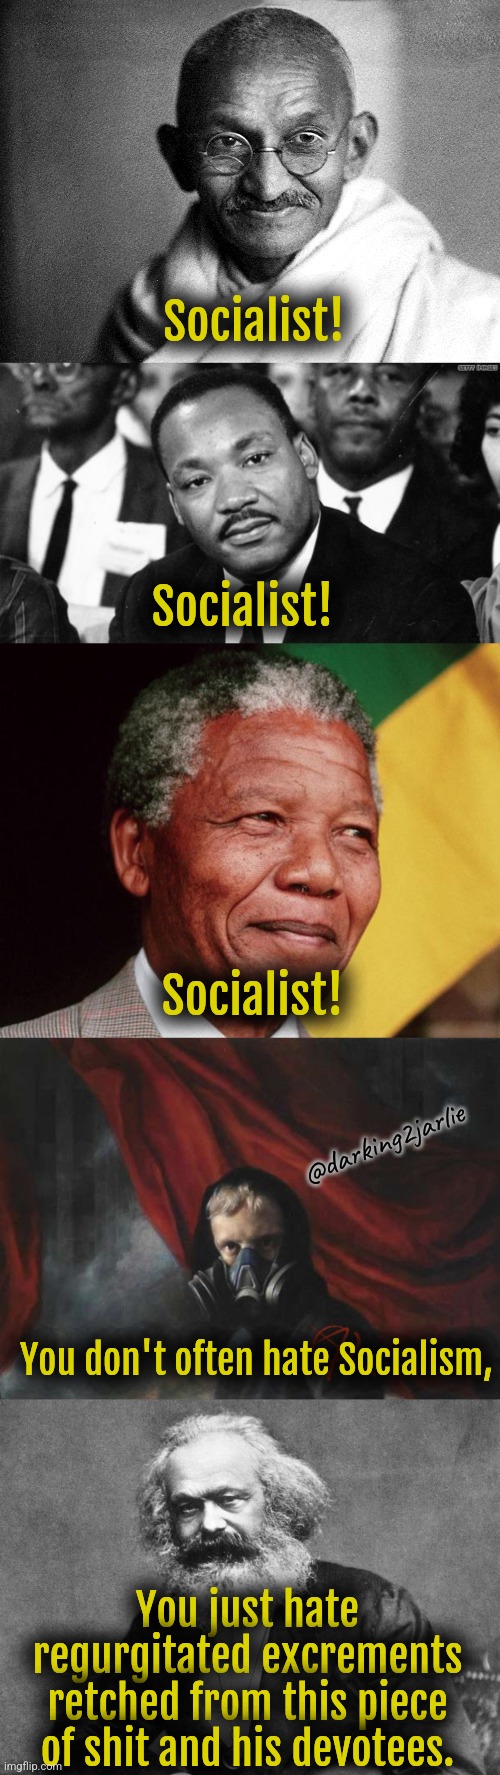 Crush the Commie! | Socialist! Socialist! Socialist! @darking2jarlie; You don't often hate Socialism, You just hate regurgitated excrements retched from this piece of shit and his devotees. | image tagged in big gandhi,mlk disappointed,nelson mandela,anarcho nihilist,karl marx,socialism | made w/ Imgflip meme maker